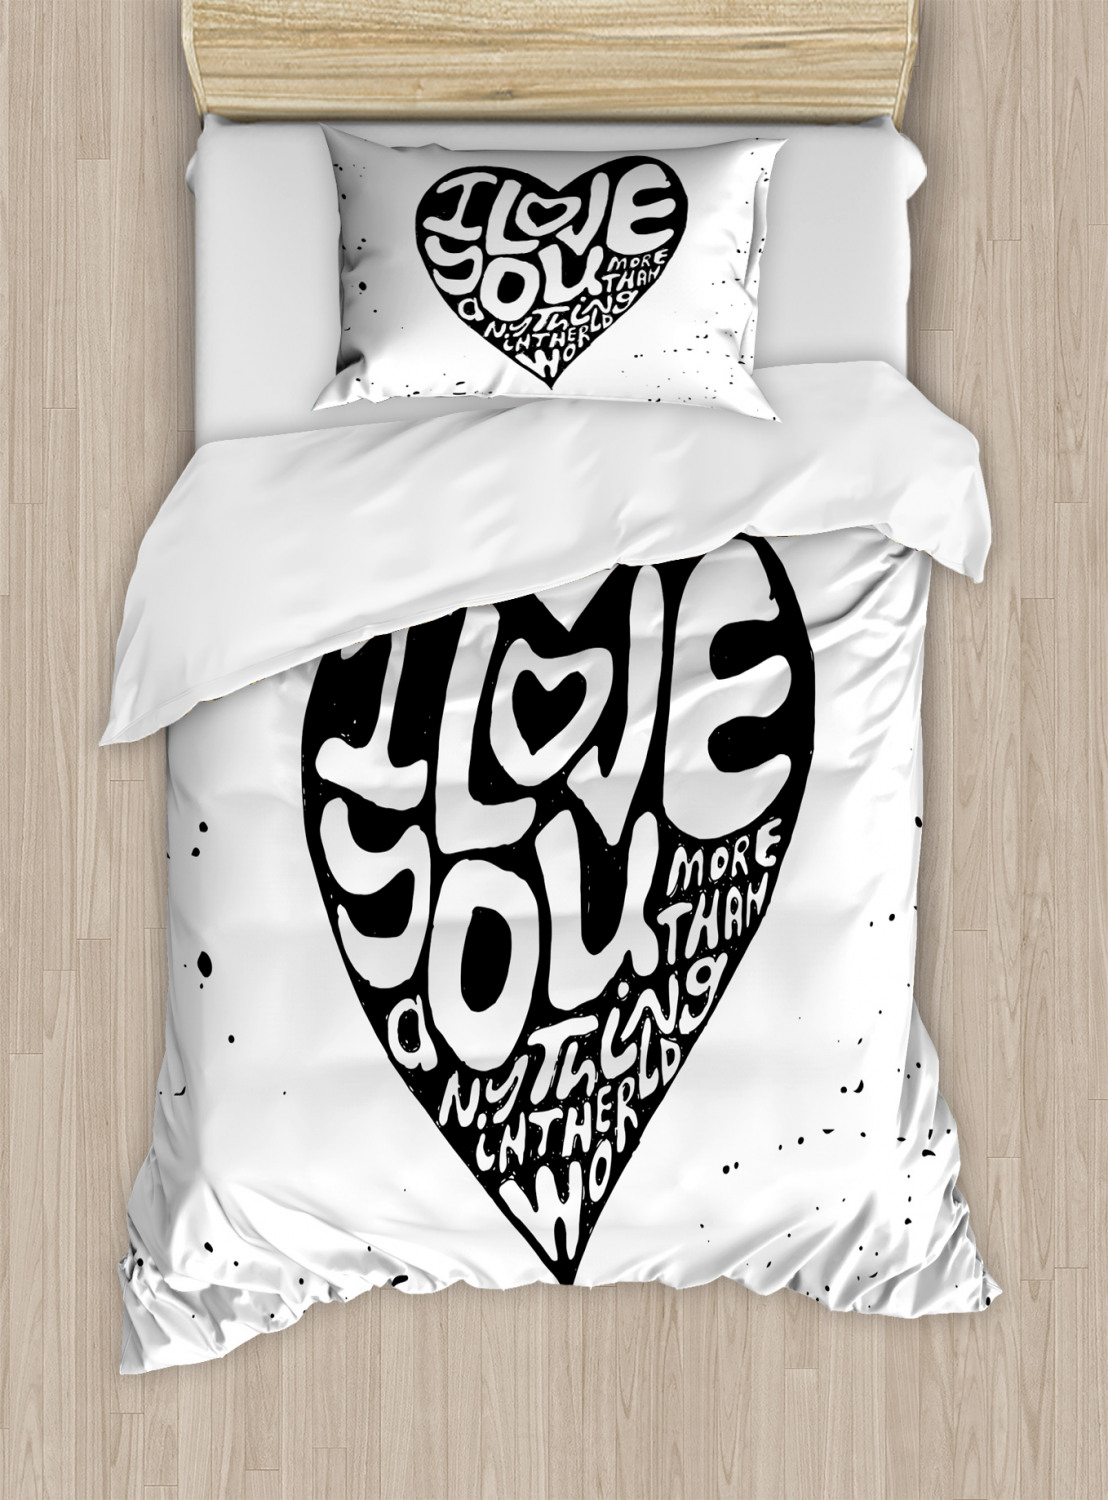 I Love You Duvet Cover Set Twin Queen King Sizes with Pillow Shams Bedding